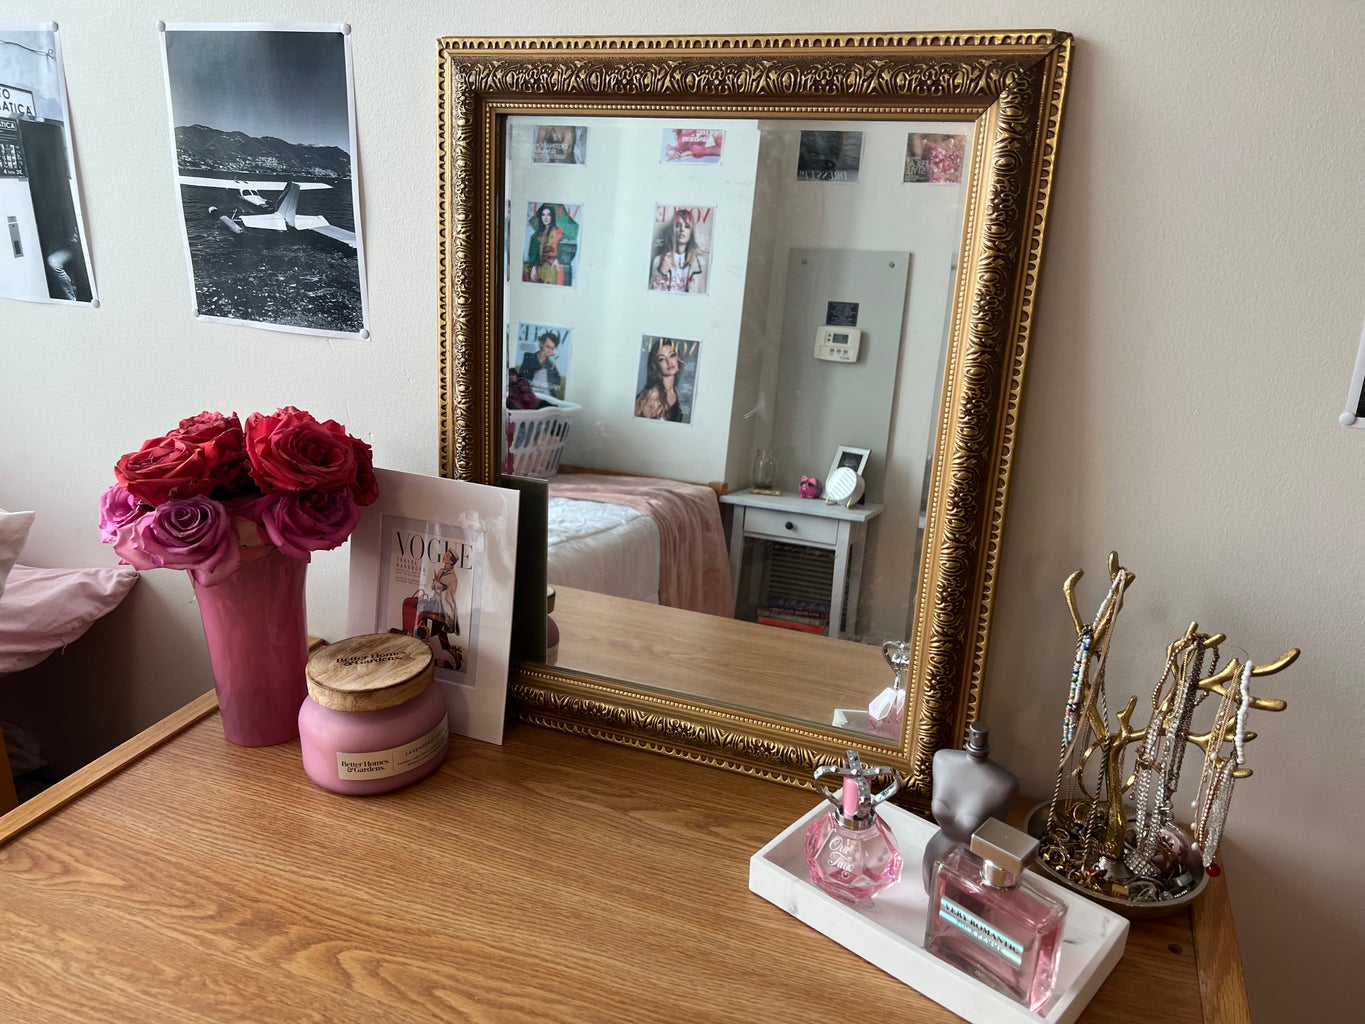 Dresser decor (talked about in article, photo for reference.)